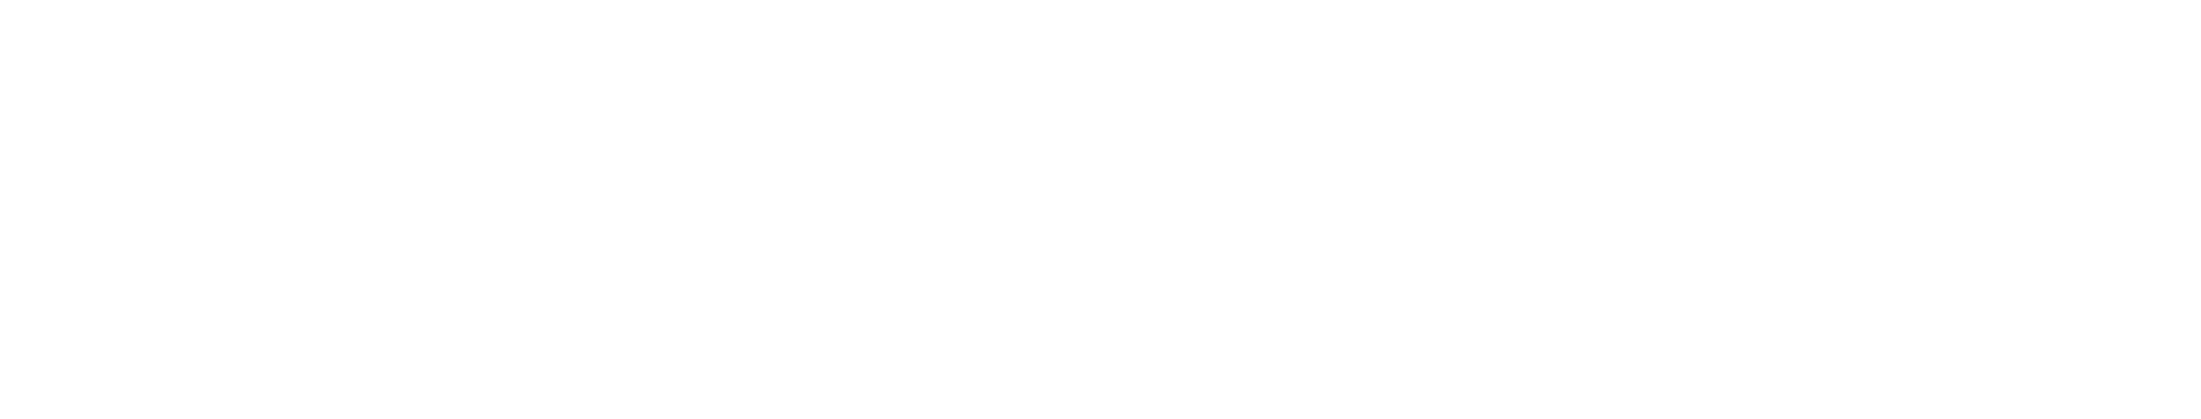 White Silhouette With Dog, Cat, And Rabbit